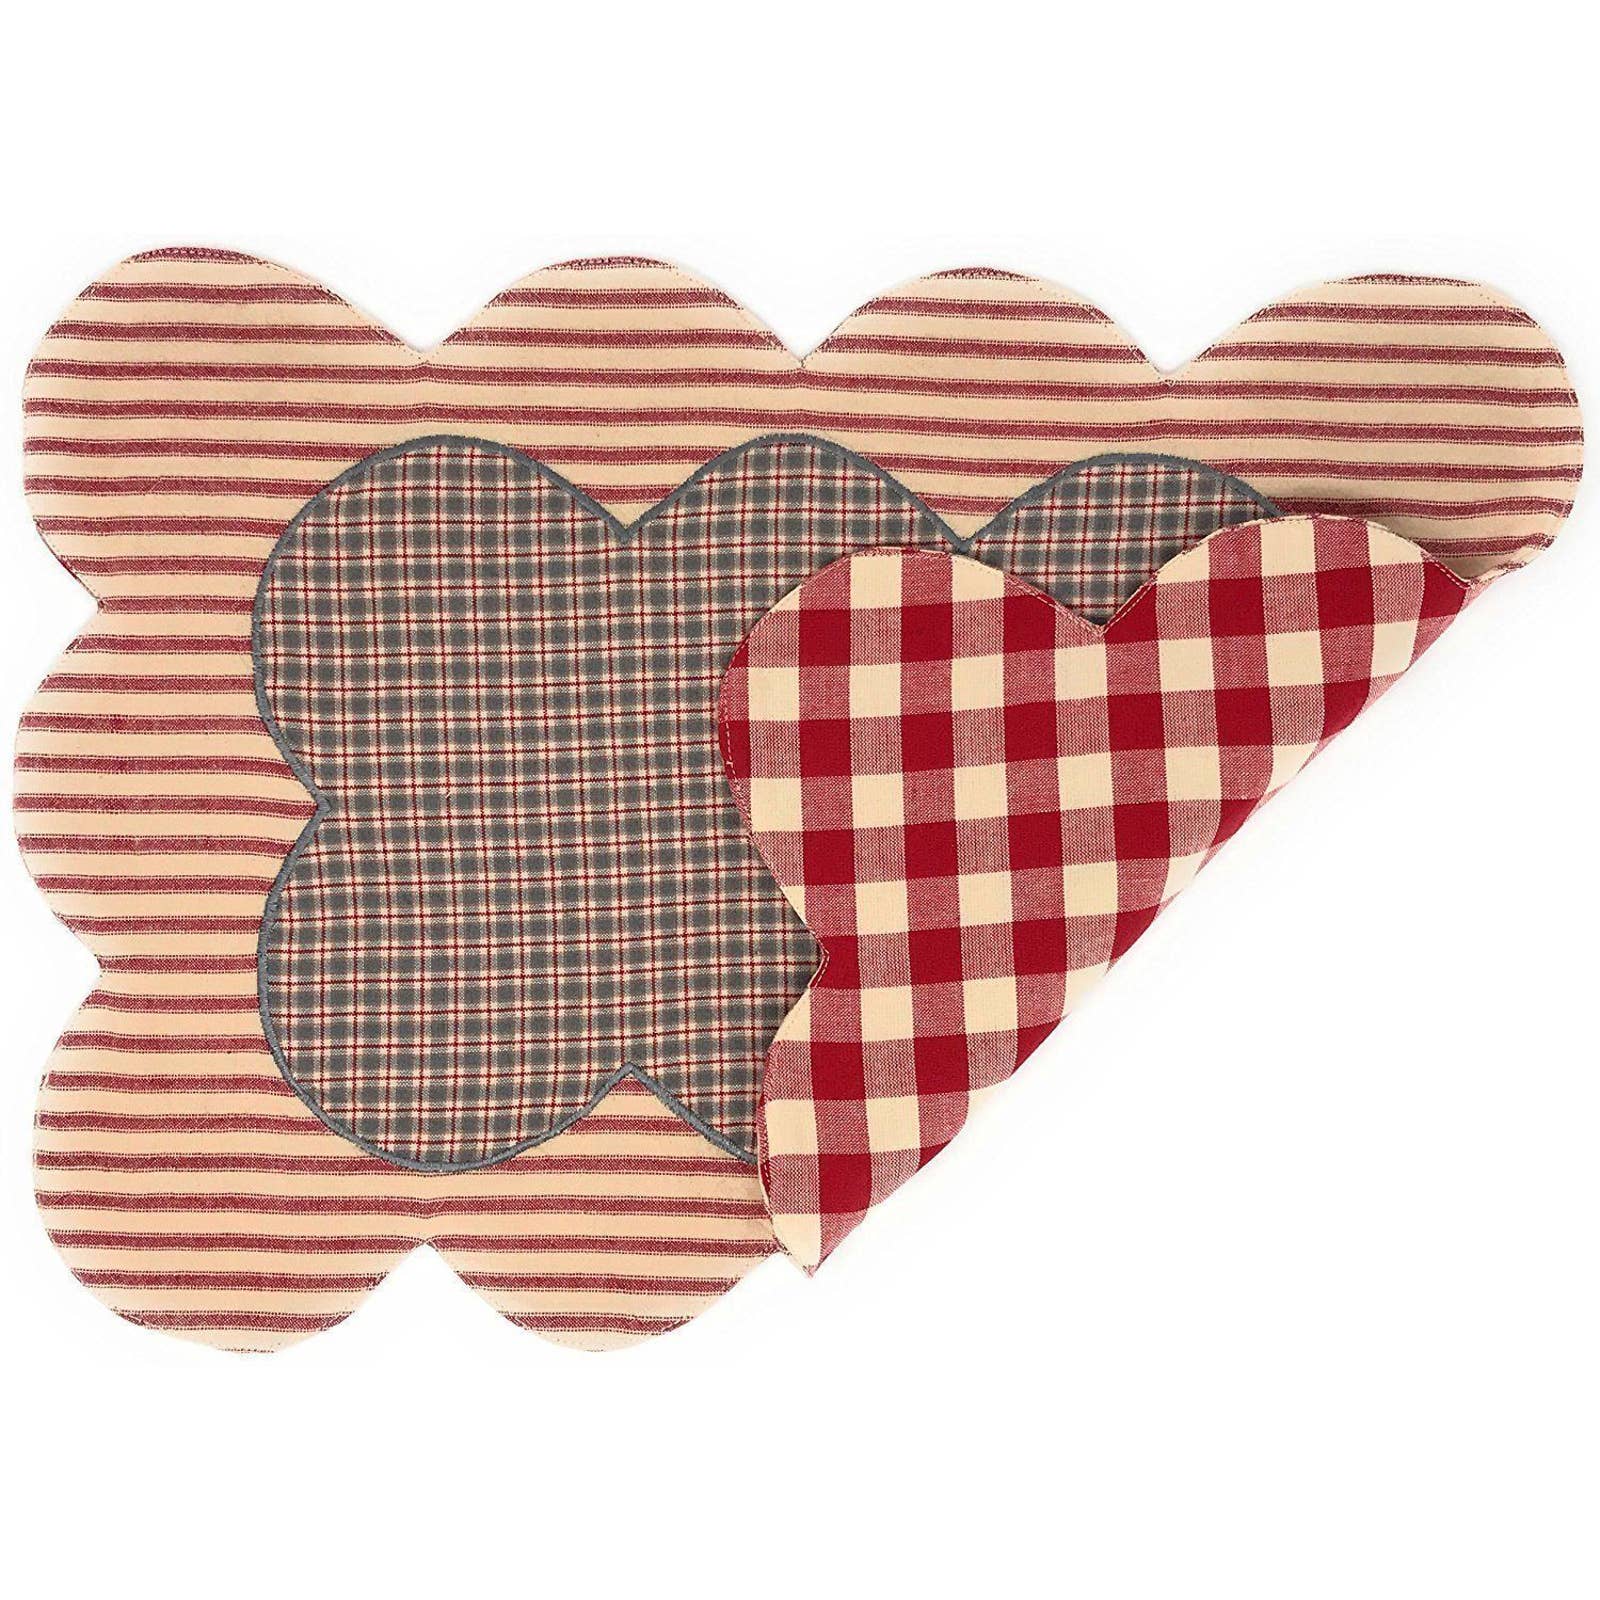 4 Pc Summers Edge Placemat Set Red White Country Picnic Scalloped Striped NEW